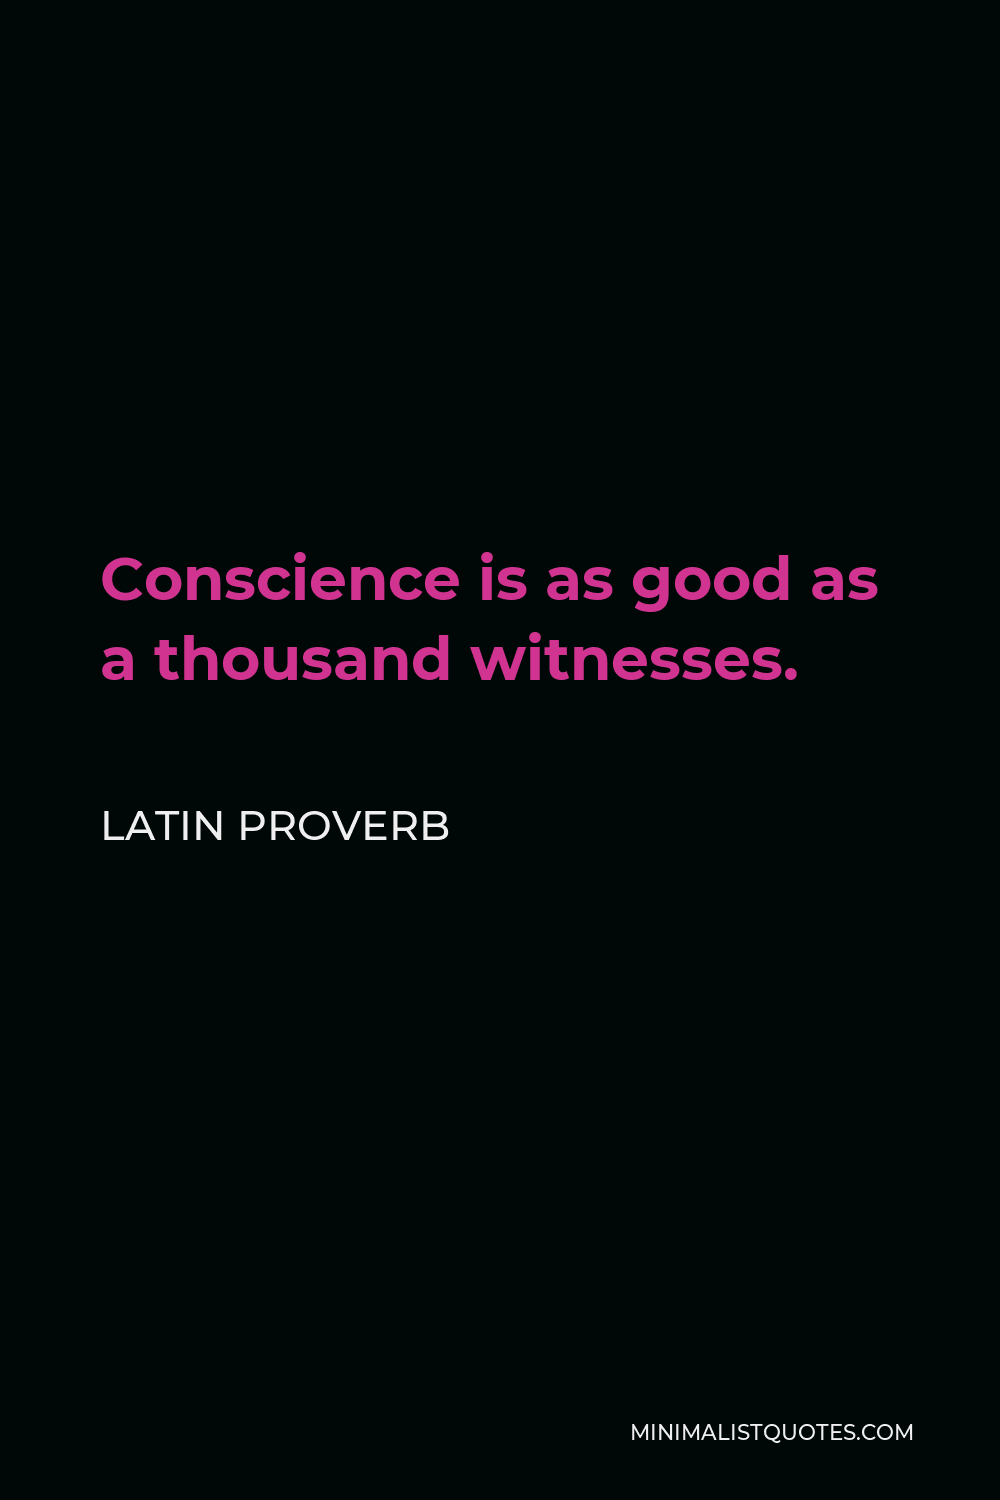 Latin Proverb Quote - Conscience is as good as a thousand witnesses.